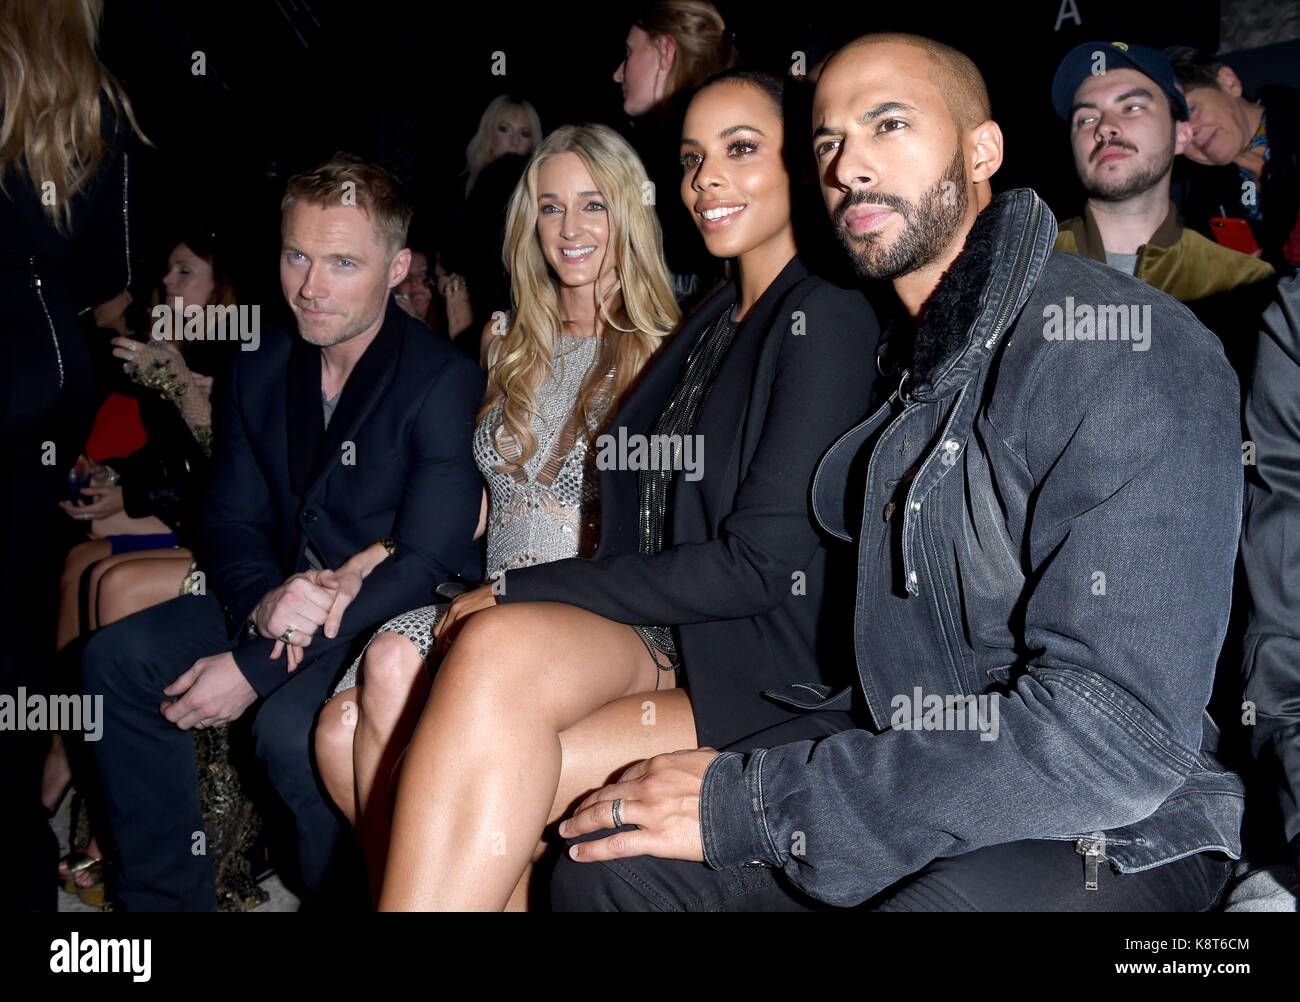 Photo Must Be Credited ©Alpha Press 079965 18/09/2017 Ronan Keating, Storm Keating, Rochelle Humes, Marvin Humes Julien Macdonald Fashion Show during London Fashion Week Spring Summer 2018 In London Stock Photo